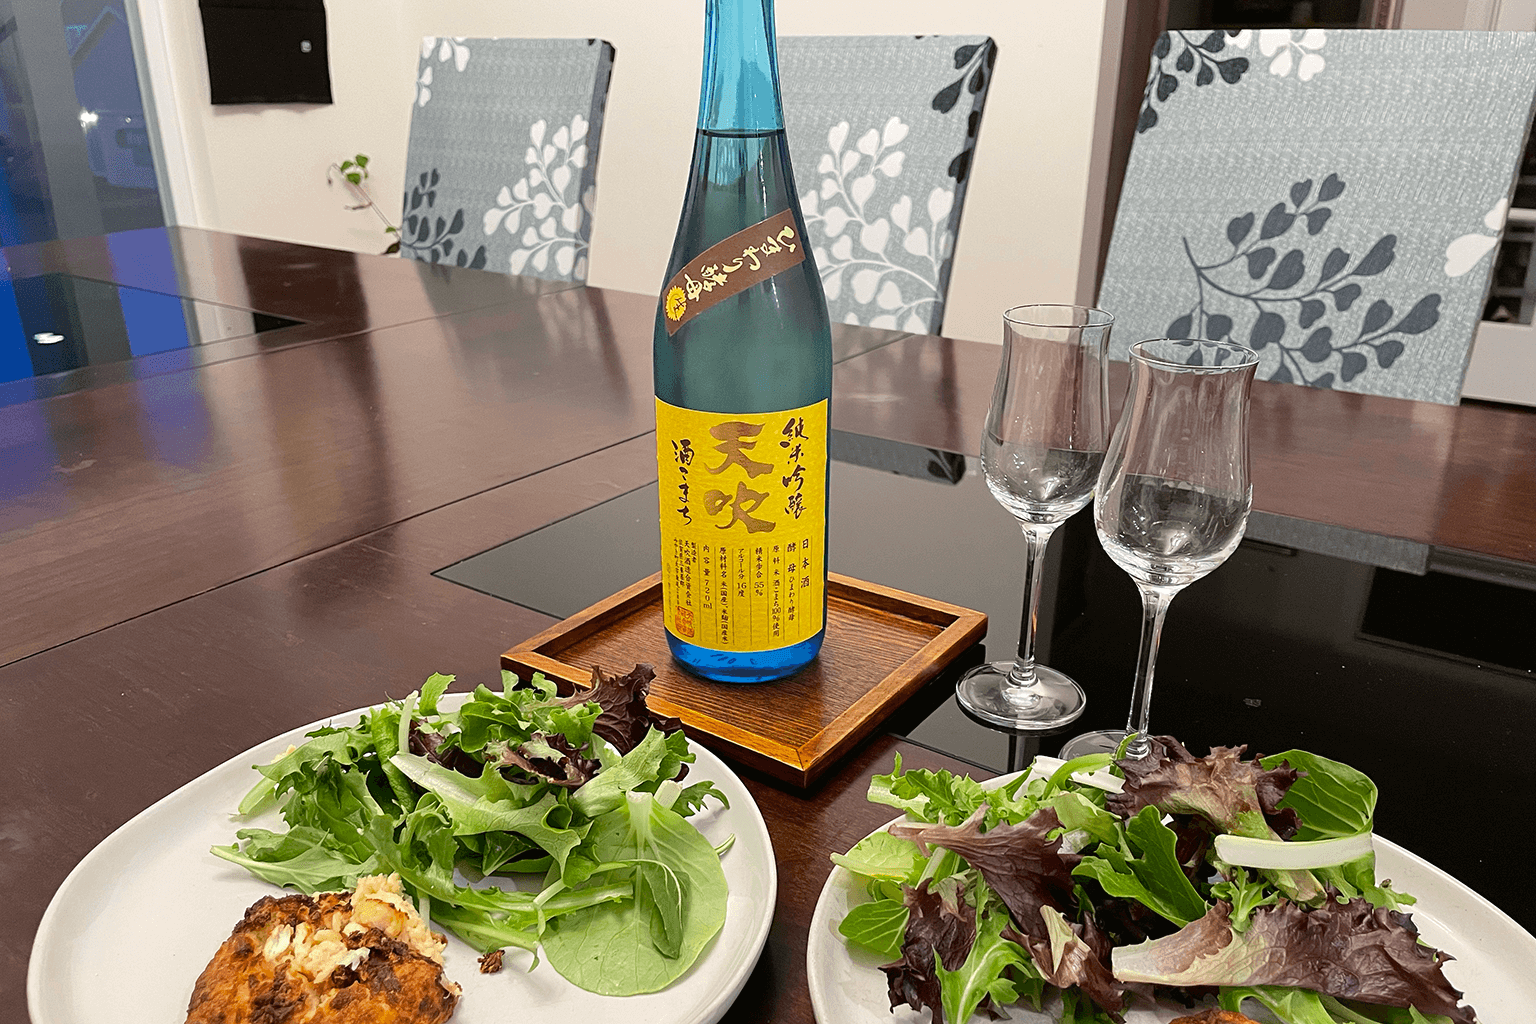 This sake is good to have on hand for the warm weather days ahead.